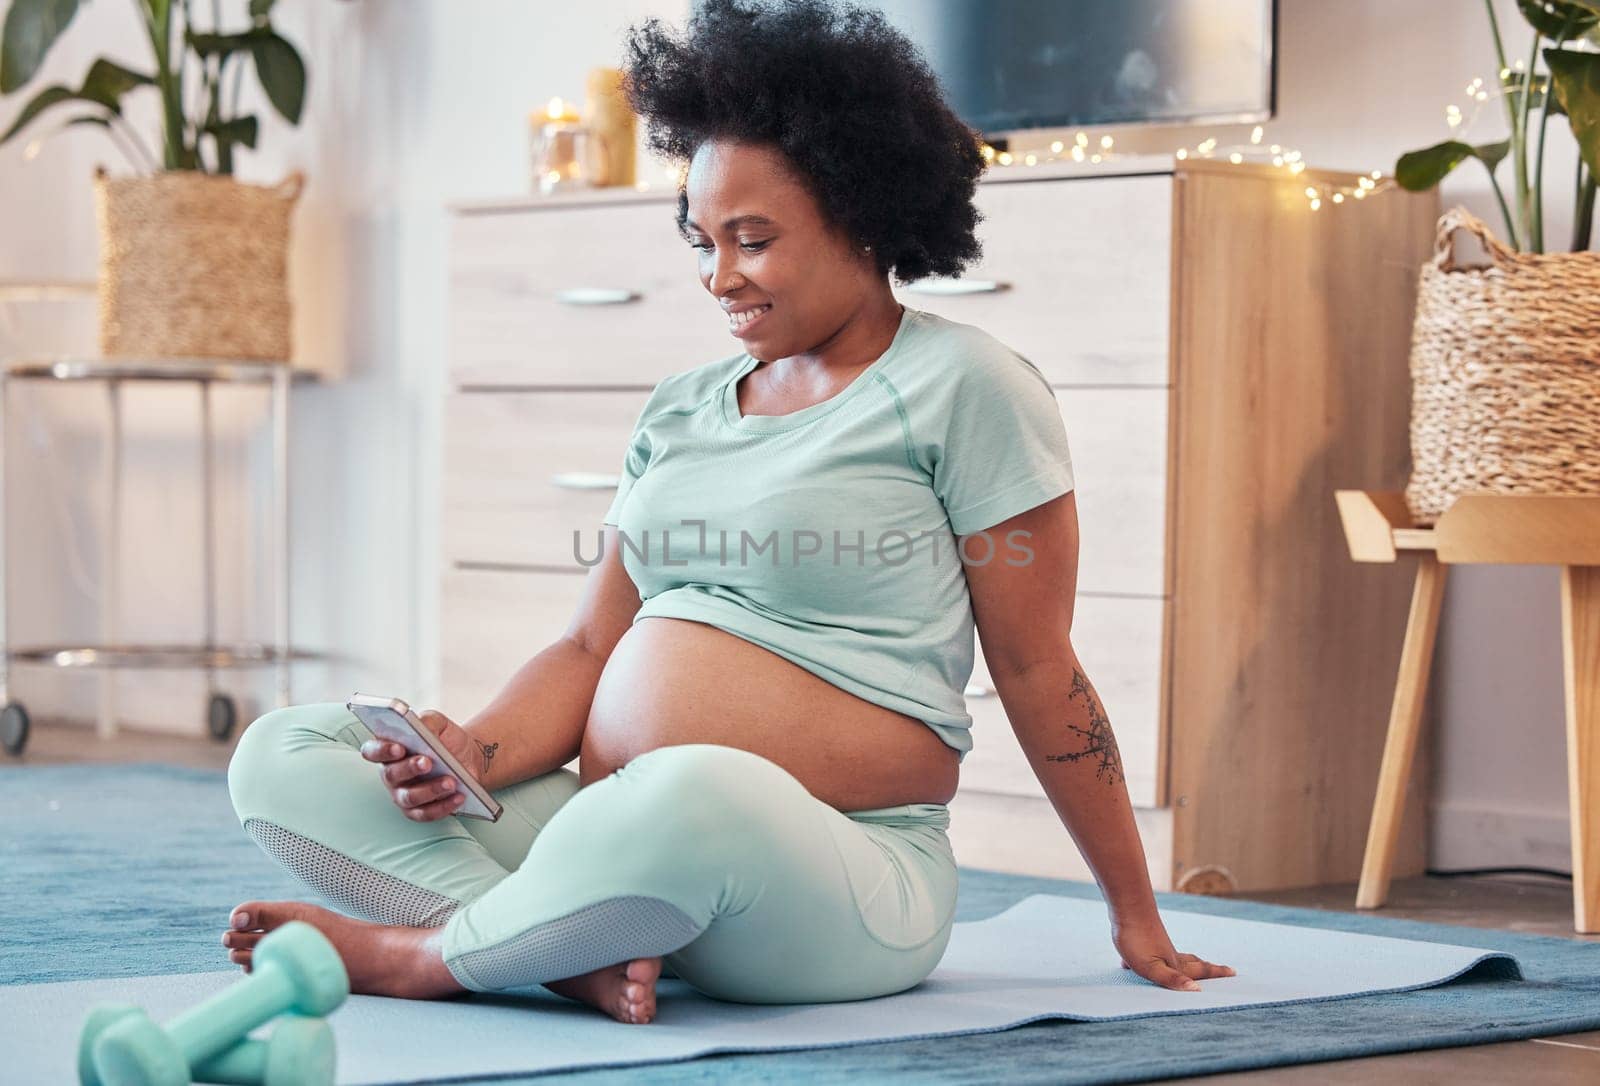 Yoga, pregnant and black woman with phone in home for social media and texting on workout break. Pregnancy, zen pilates and female with mobile smartphone for web browsing or scrolling after training